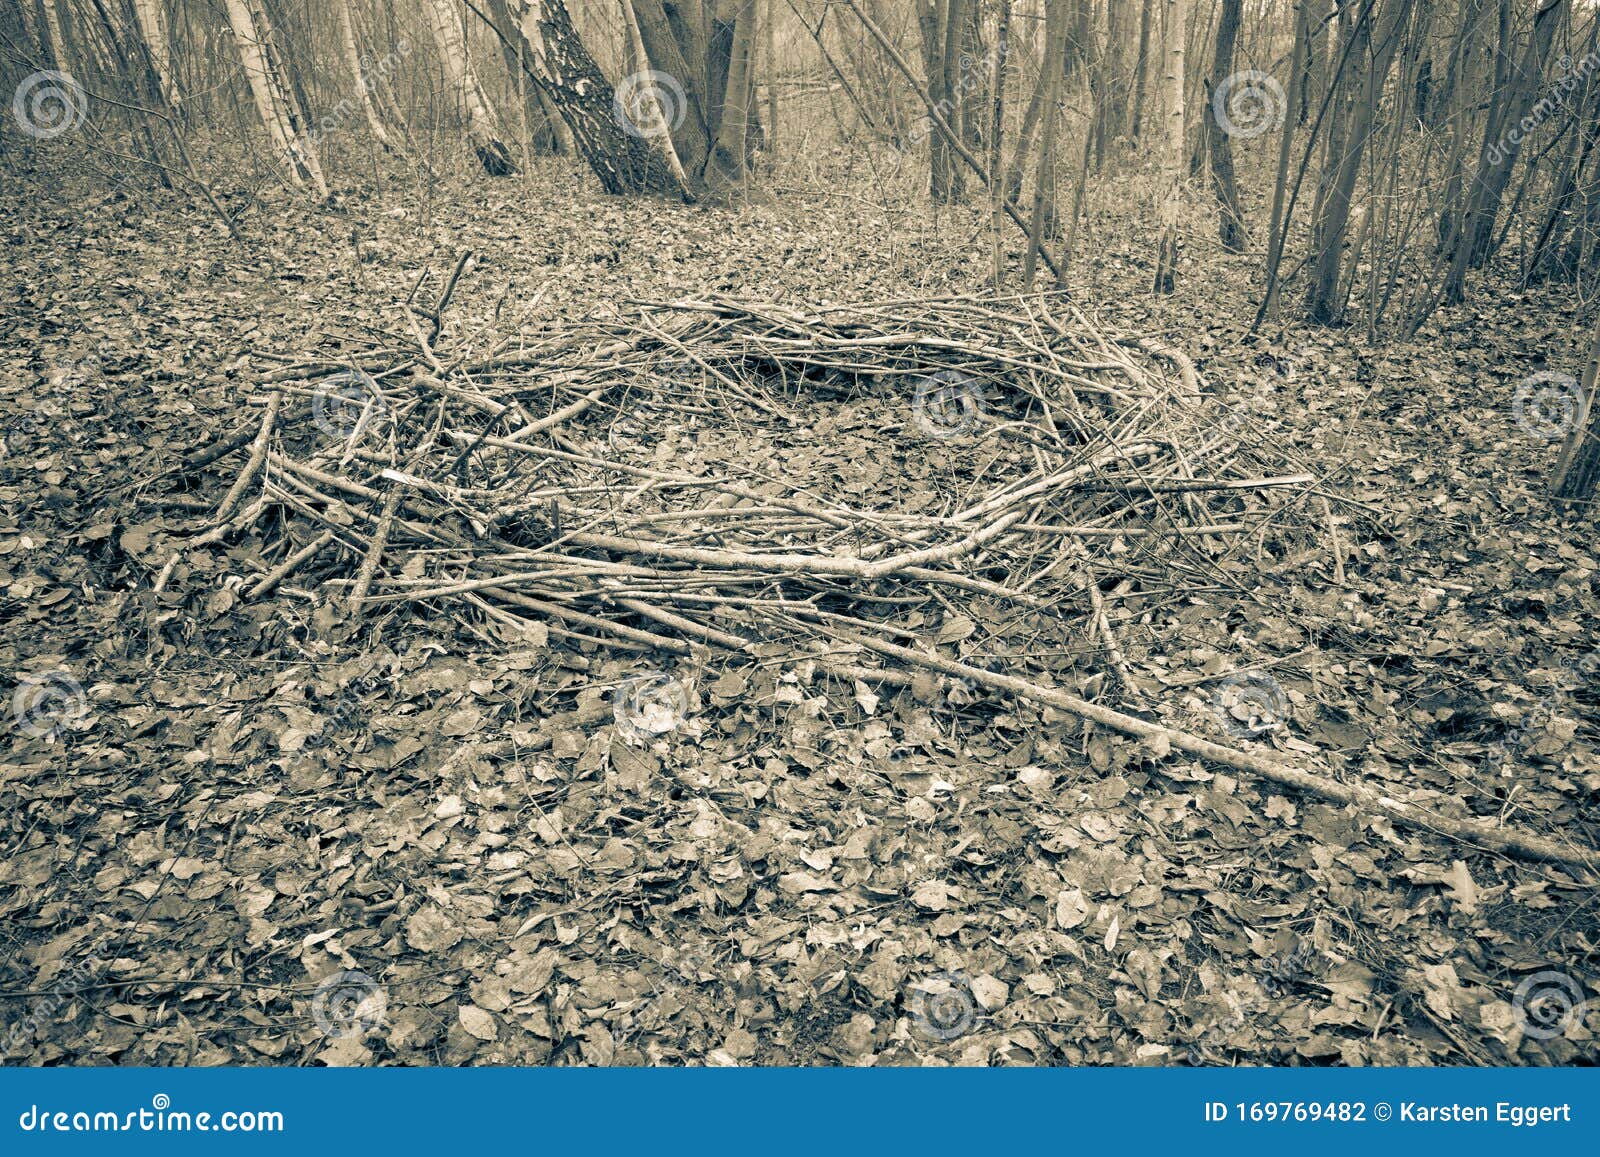 A Forest Lies a Mysterious Circle of Branches, Which Looks Like a Cult